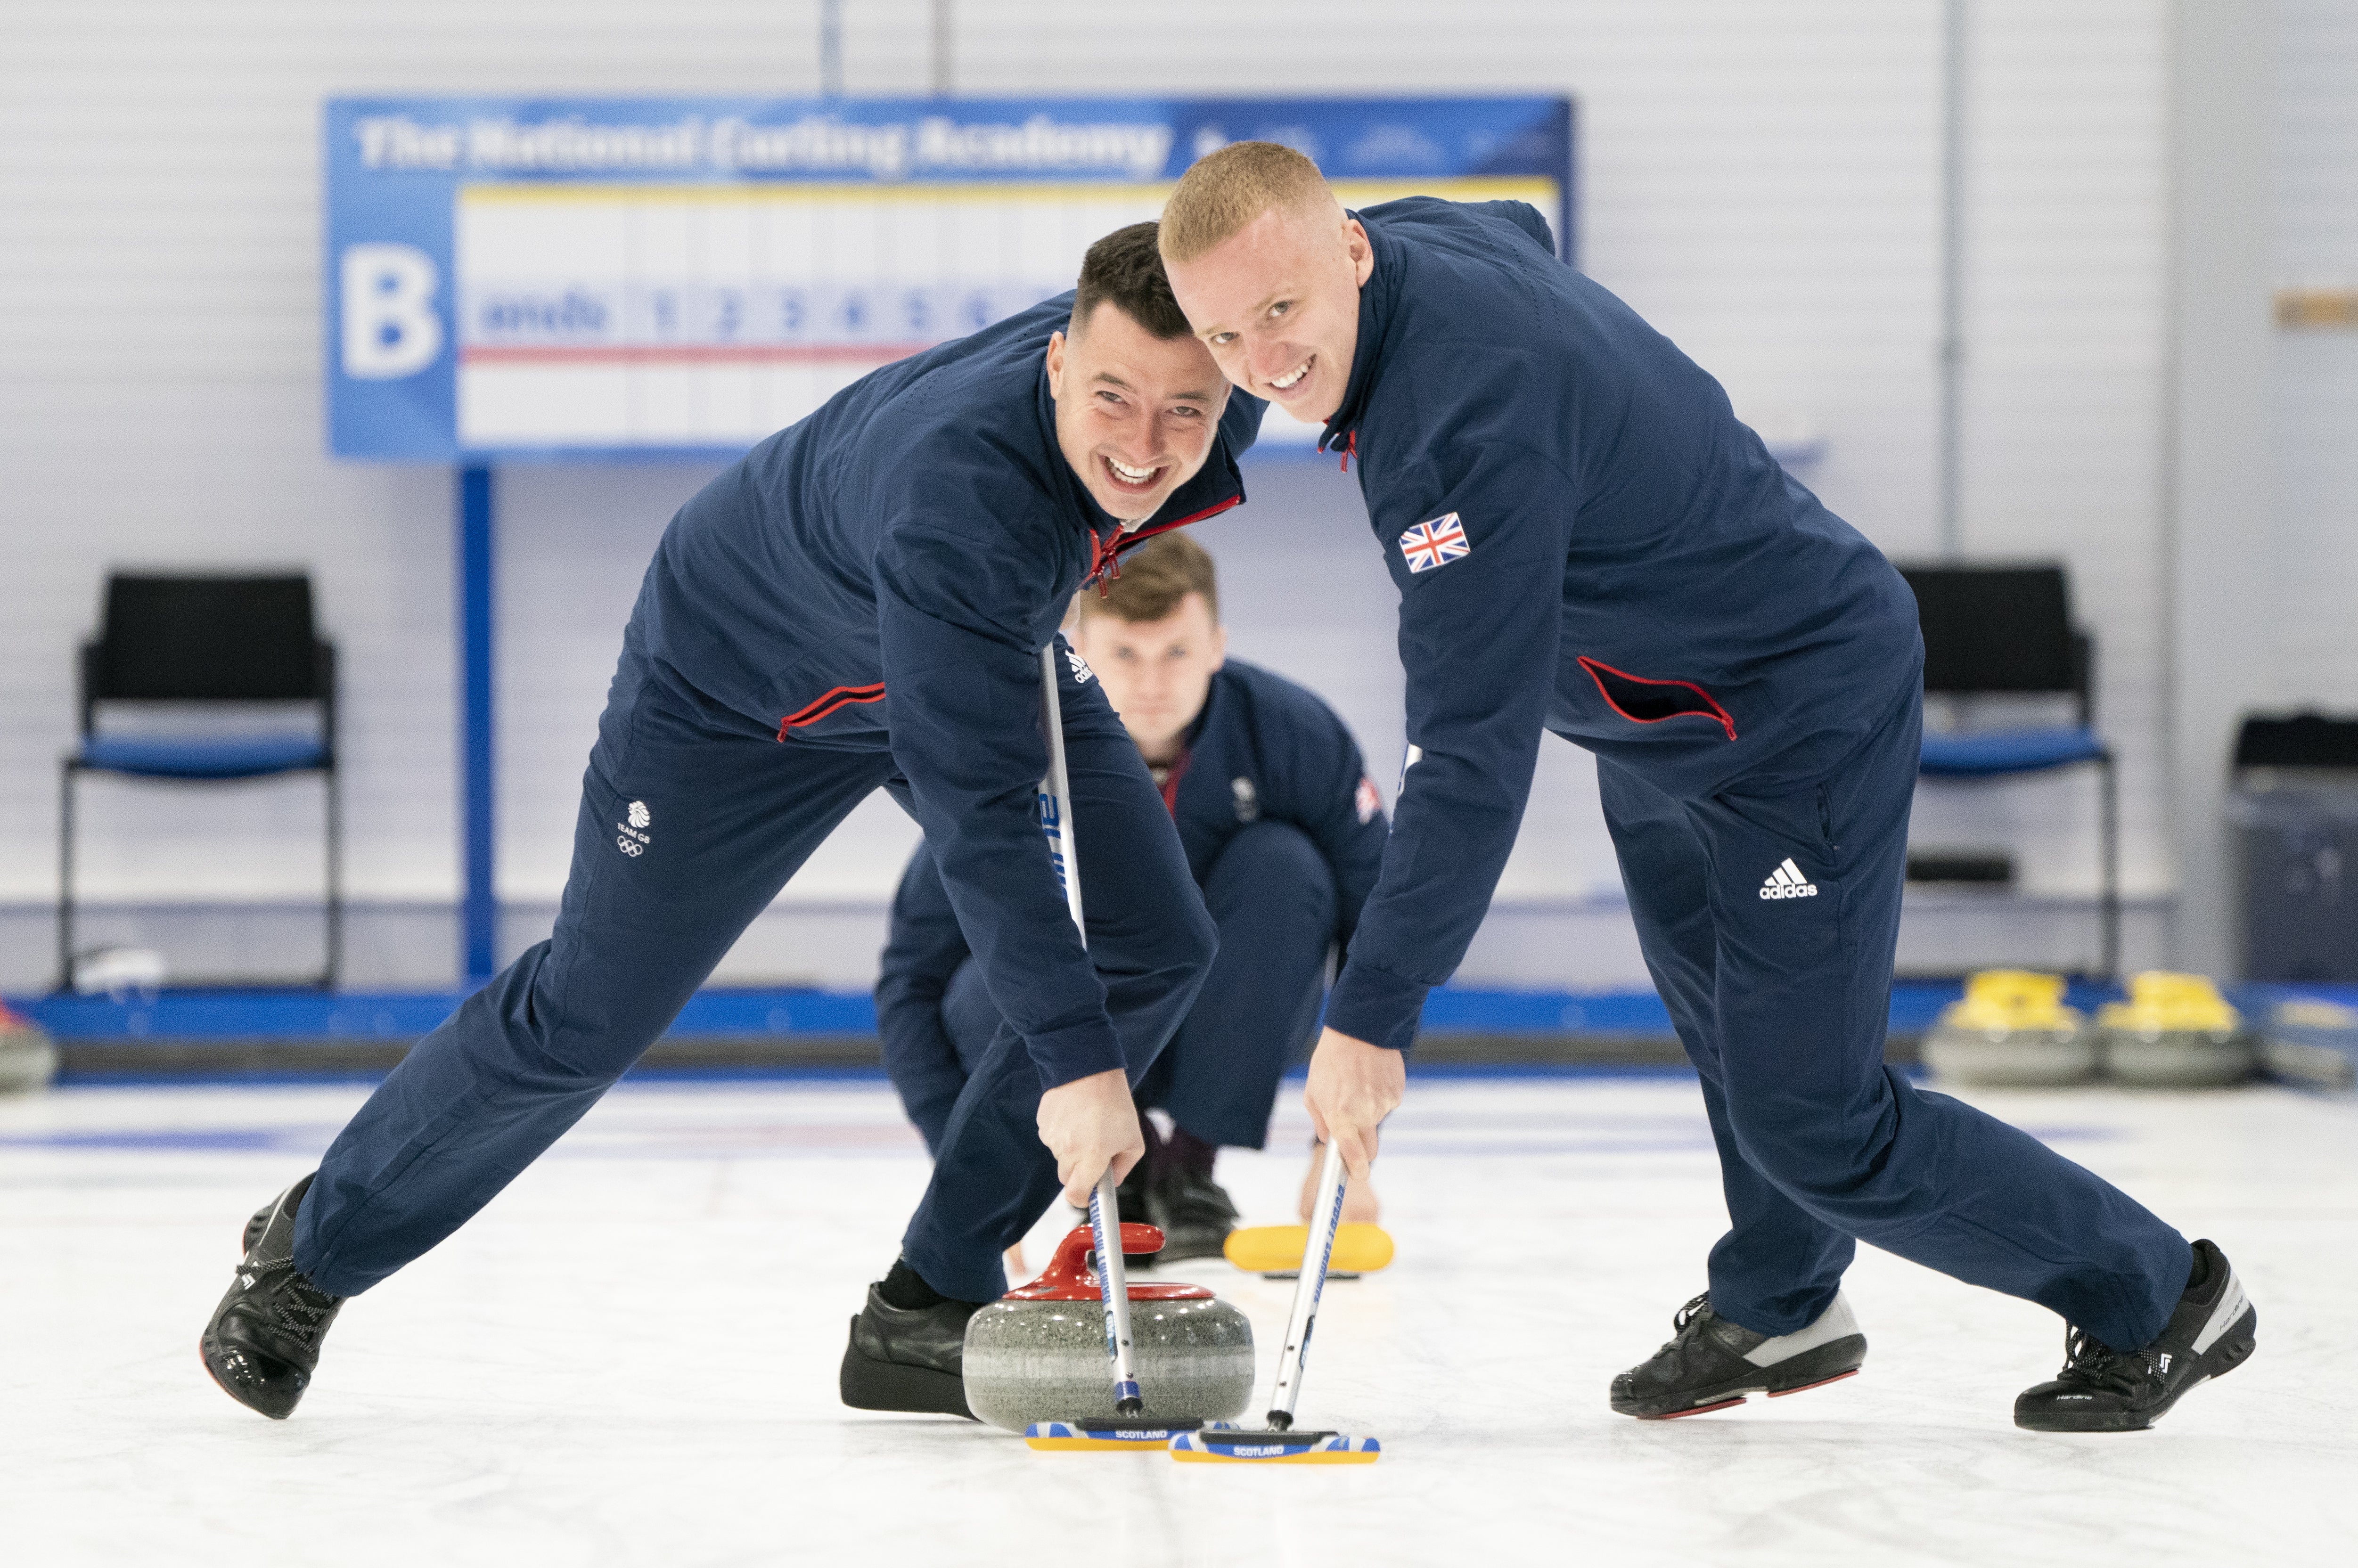 Bruce Mouat’s men’s curling team stands a strong chance in Beijing (Jane Barlow/PA)